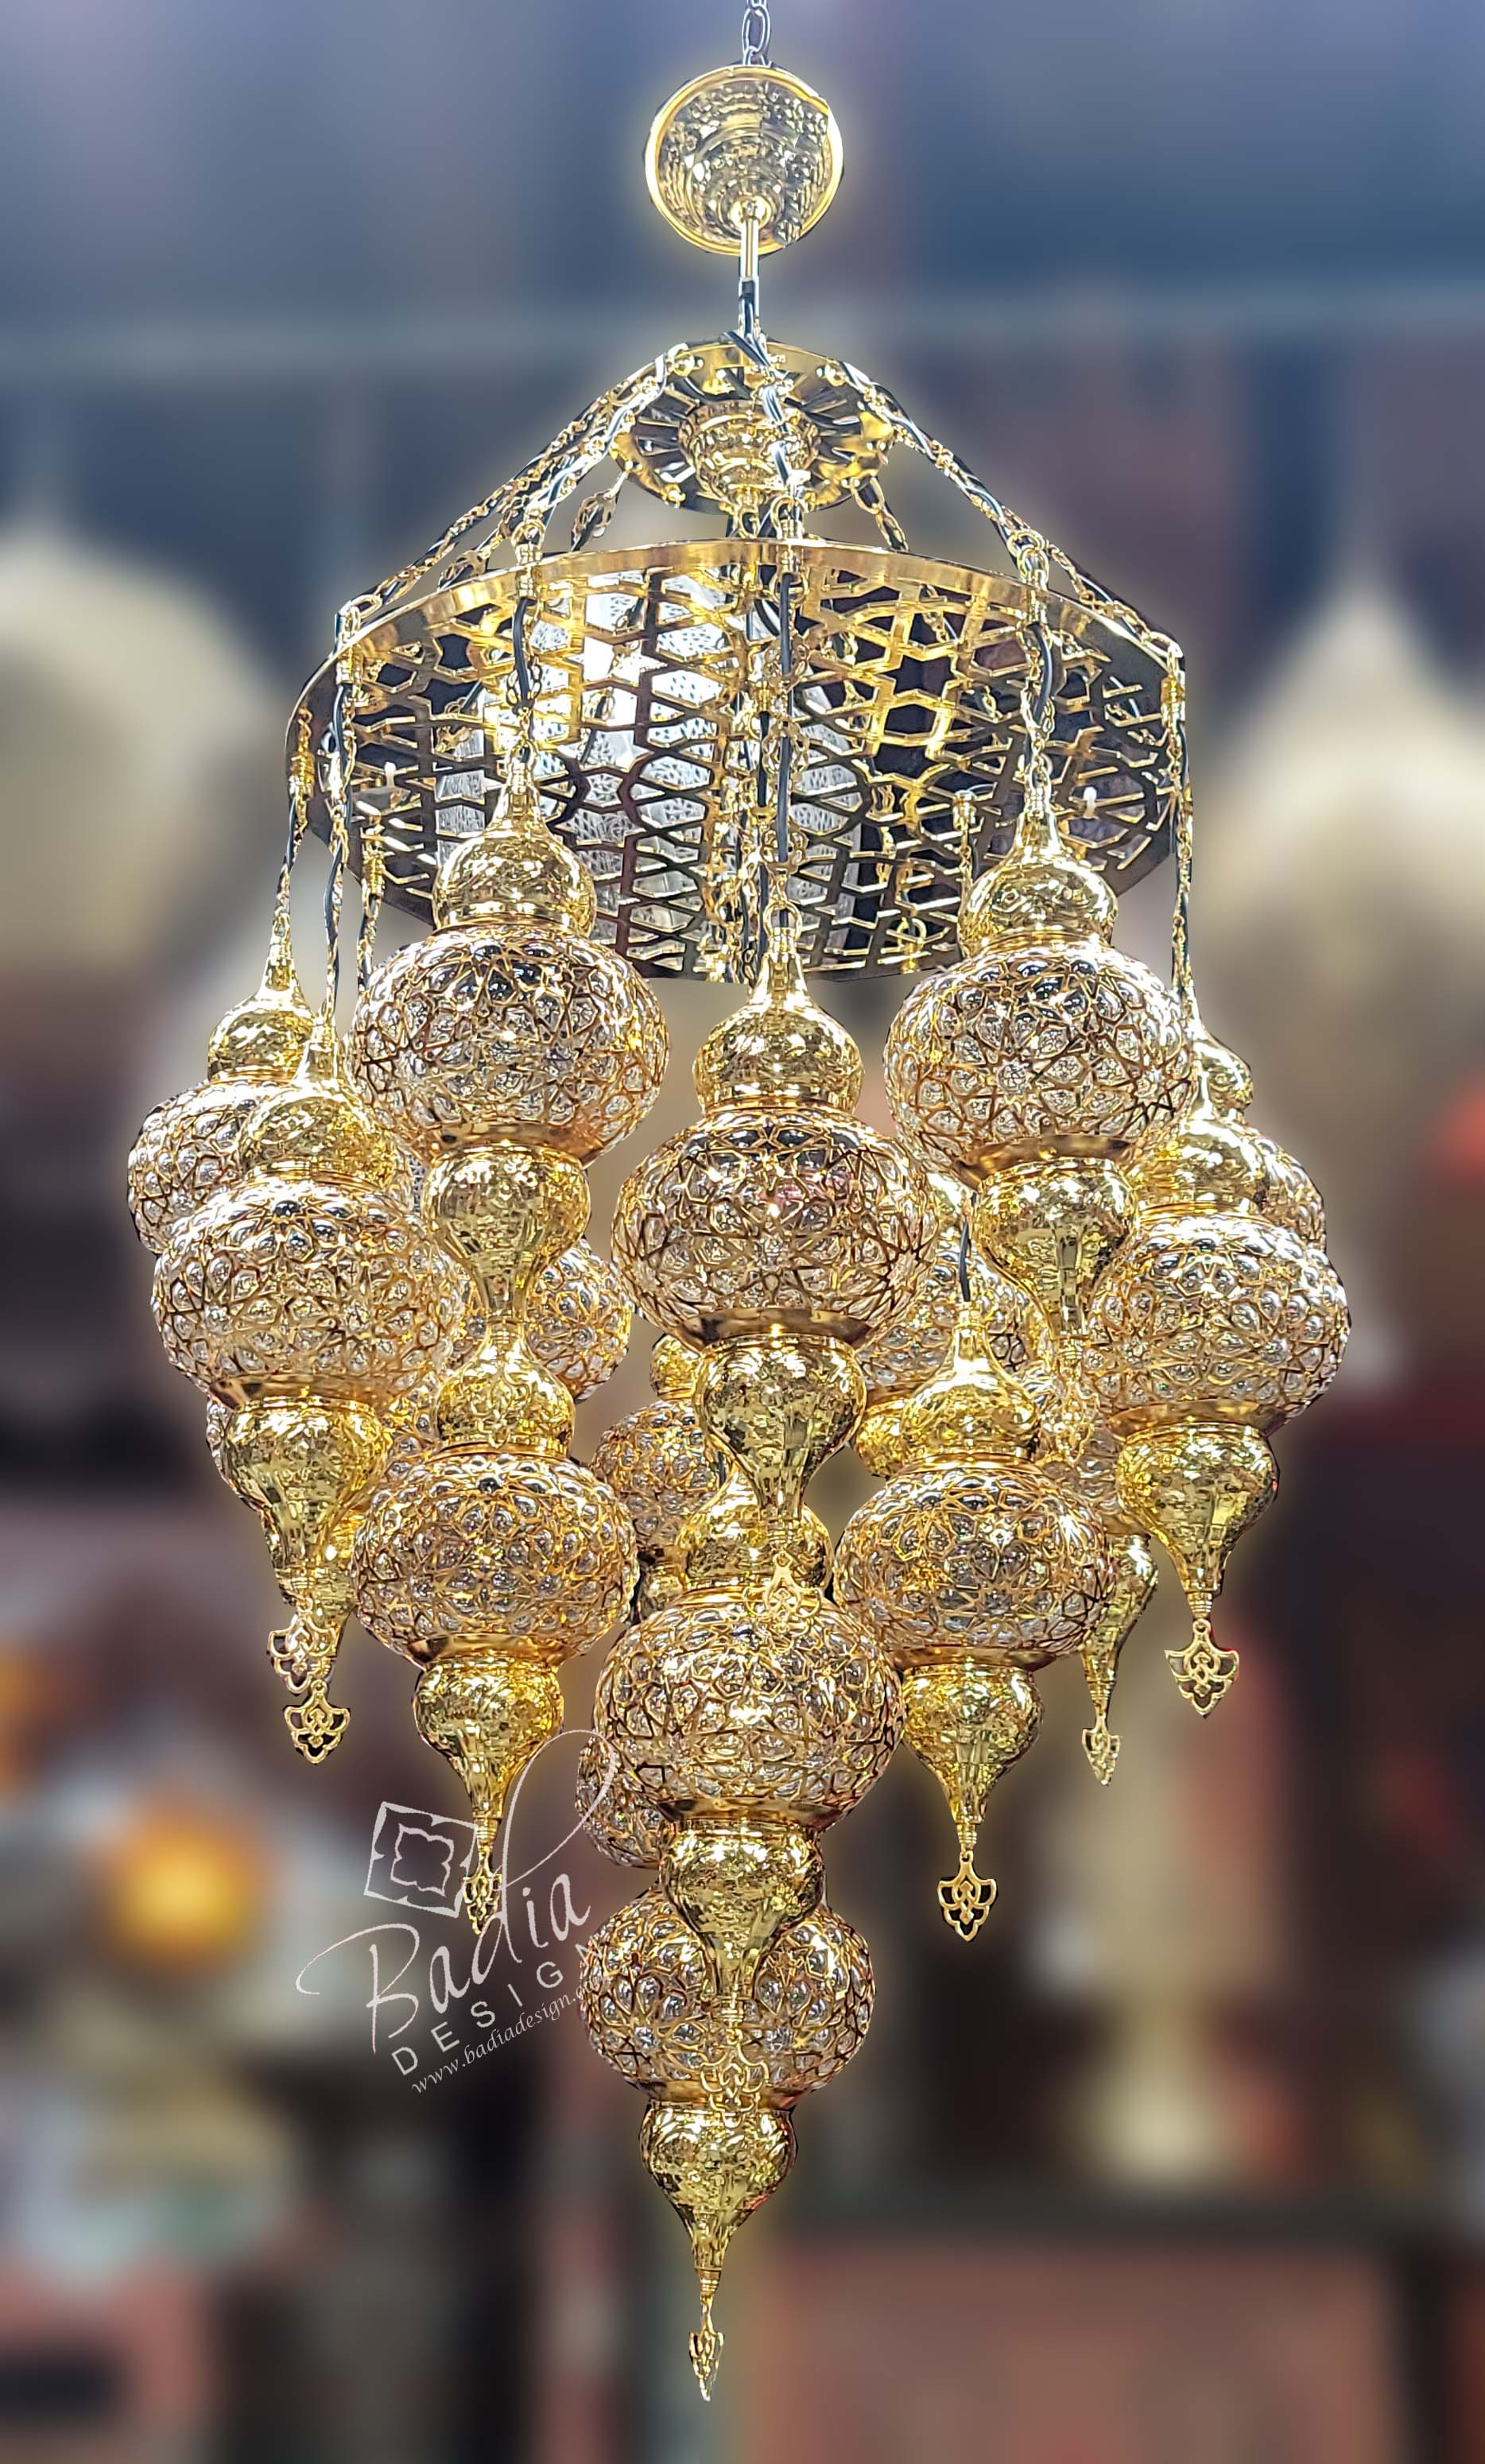 Turkish Chandelier with Clear Glass Brass from Badia Design Los 5420 Vineland Ave., North Hollywood, CA 1601, Latitude: 34.169138, Longitude: -118.370080 | Visit our site www.badiadesign.com for more info.